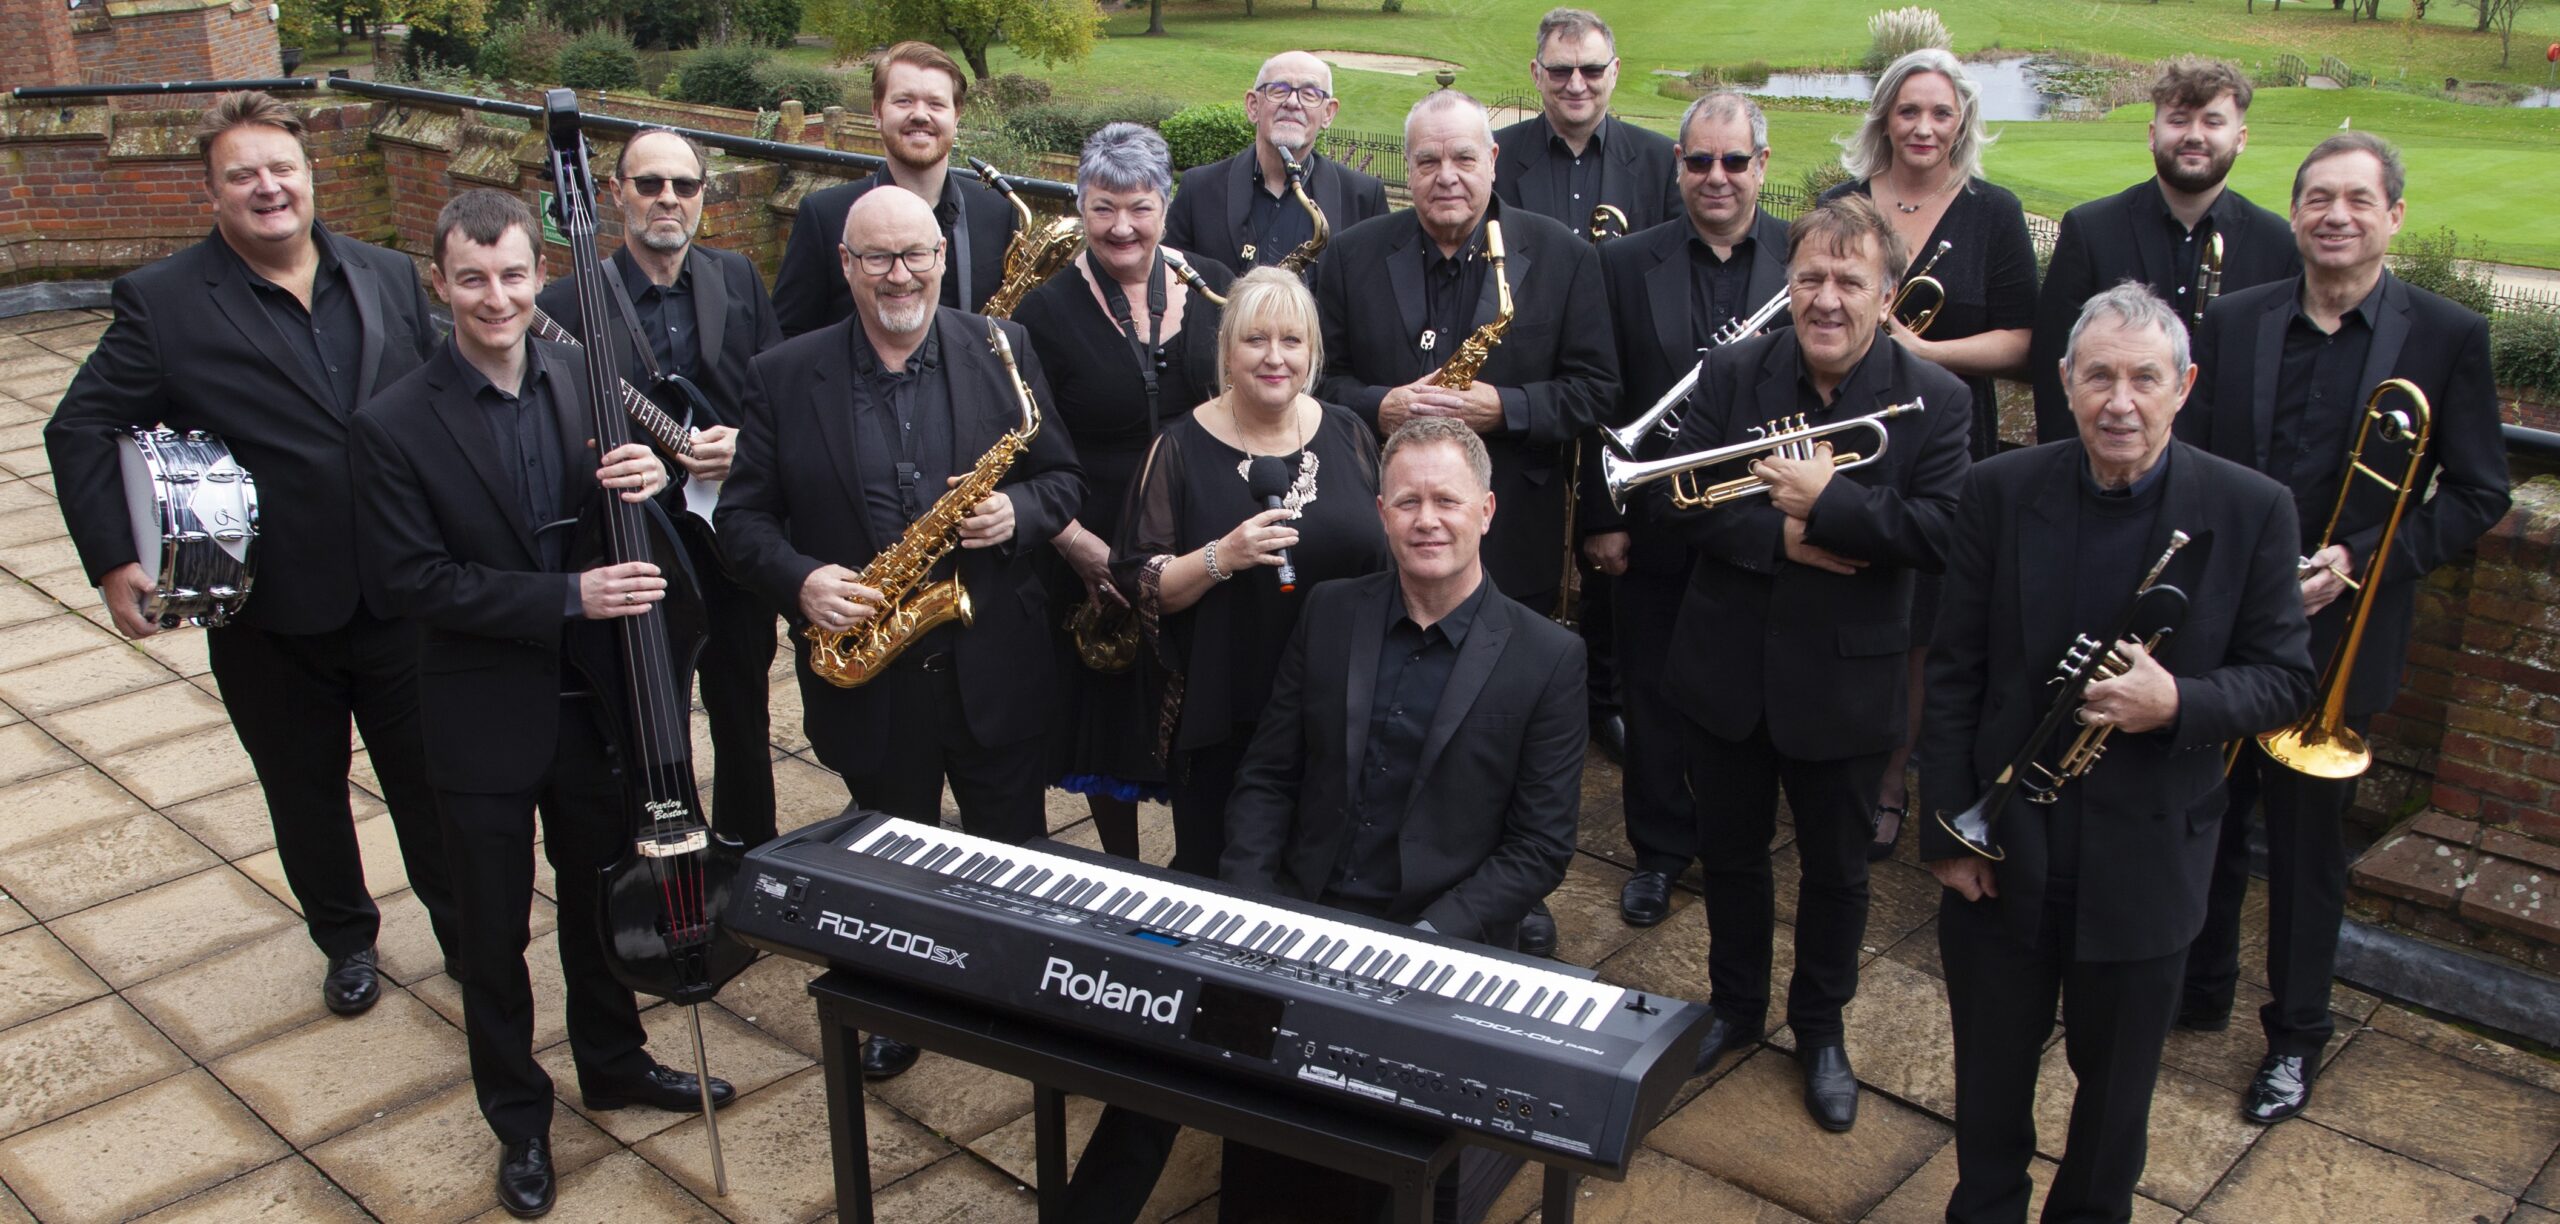 The Front Row Big Band - One of the East's Best Big Bands, performing across Norwich, Kings Lynn, Dereham, Cromer, Gorleston, and East Anglia.